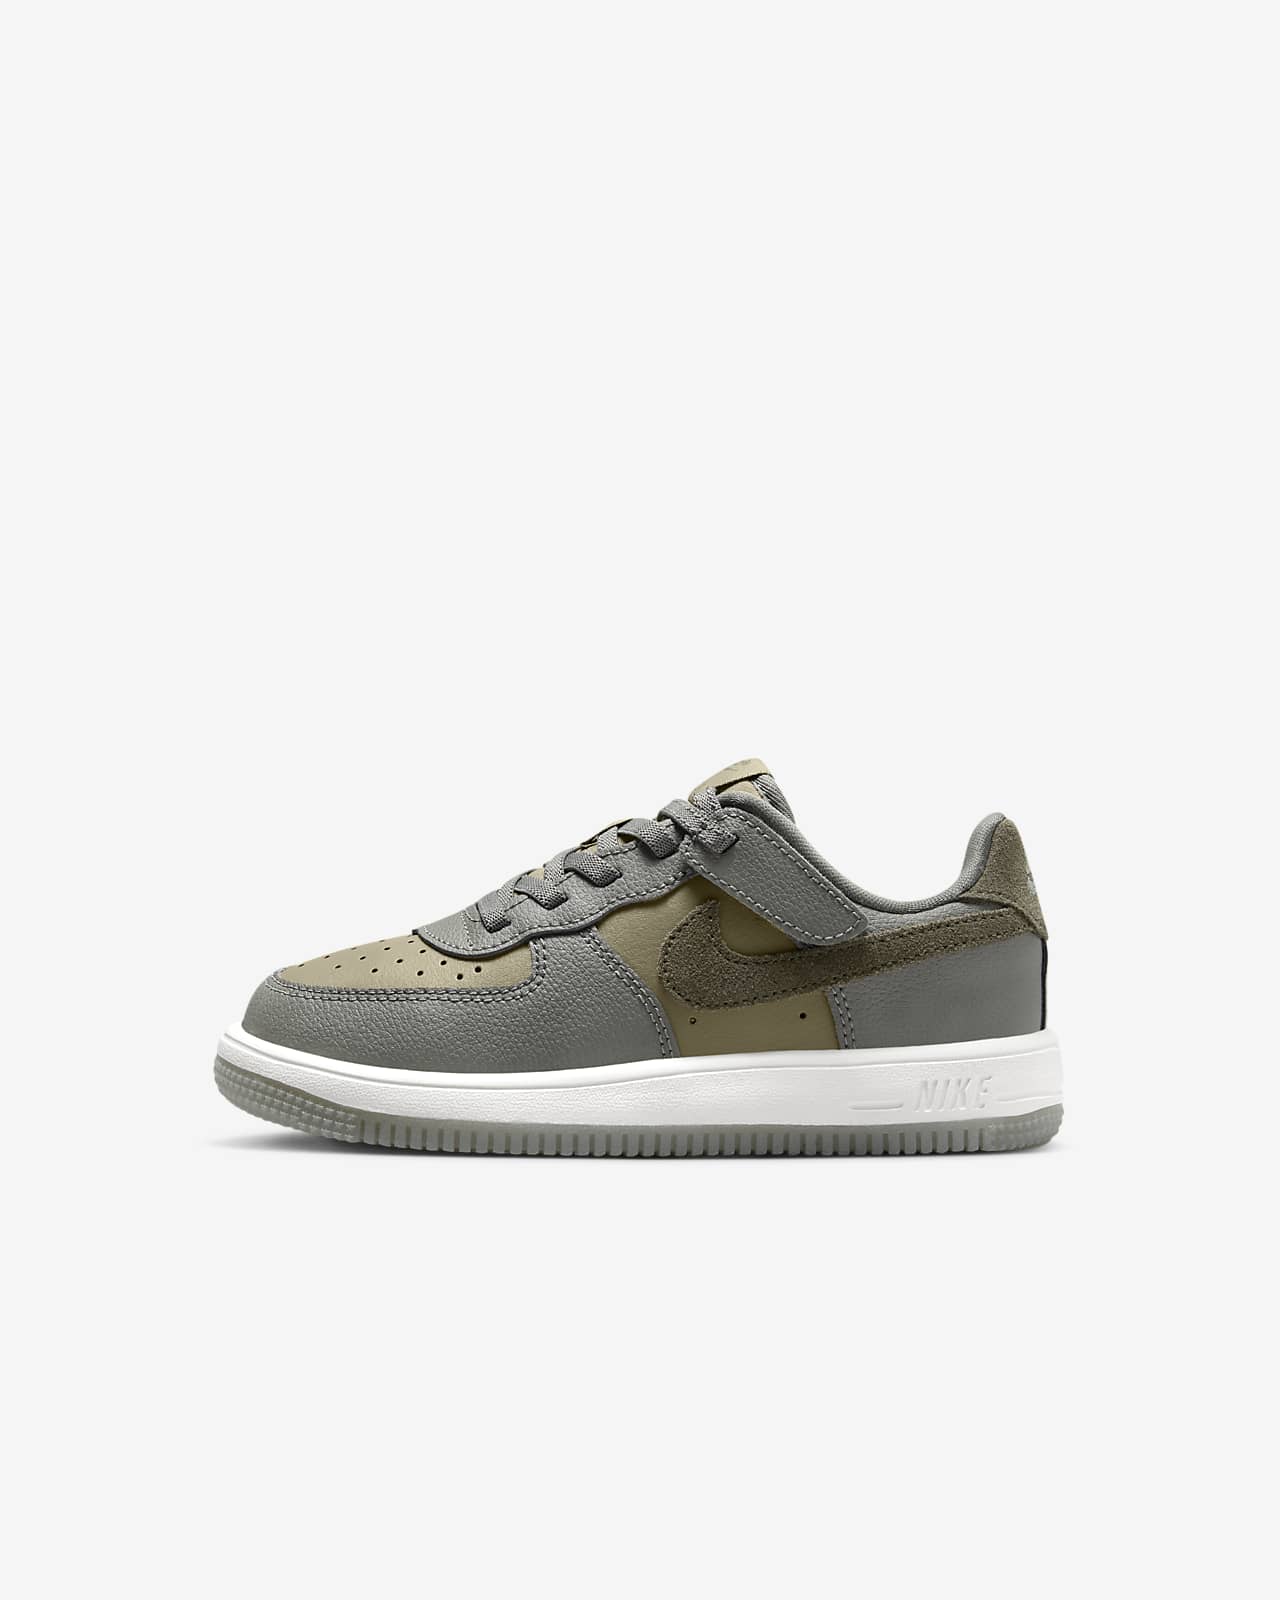 The Nike Air Force 1 Low Dark Stucco Medium Olive Releases Spring 2024